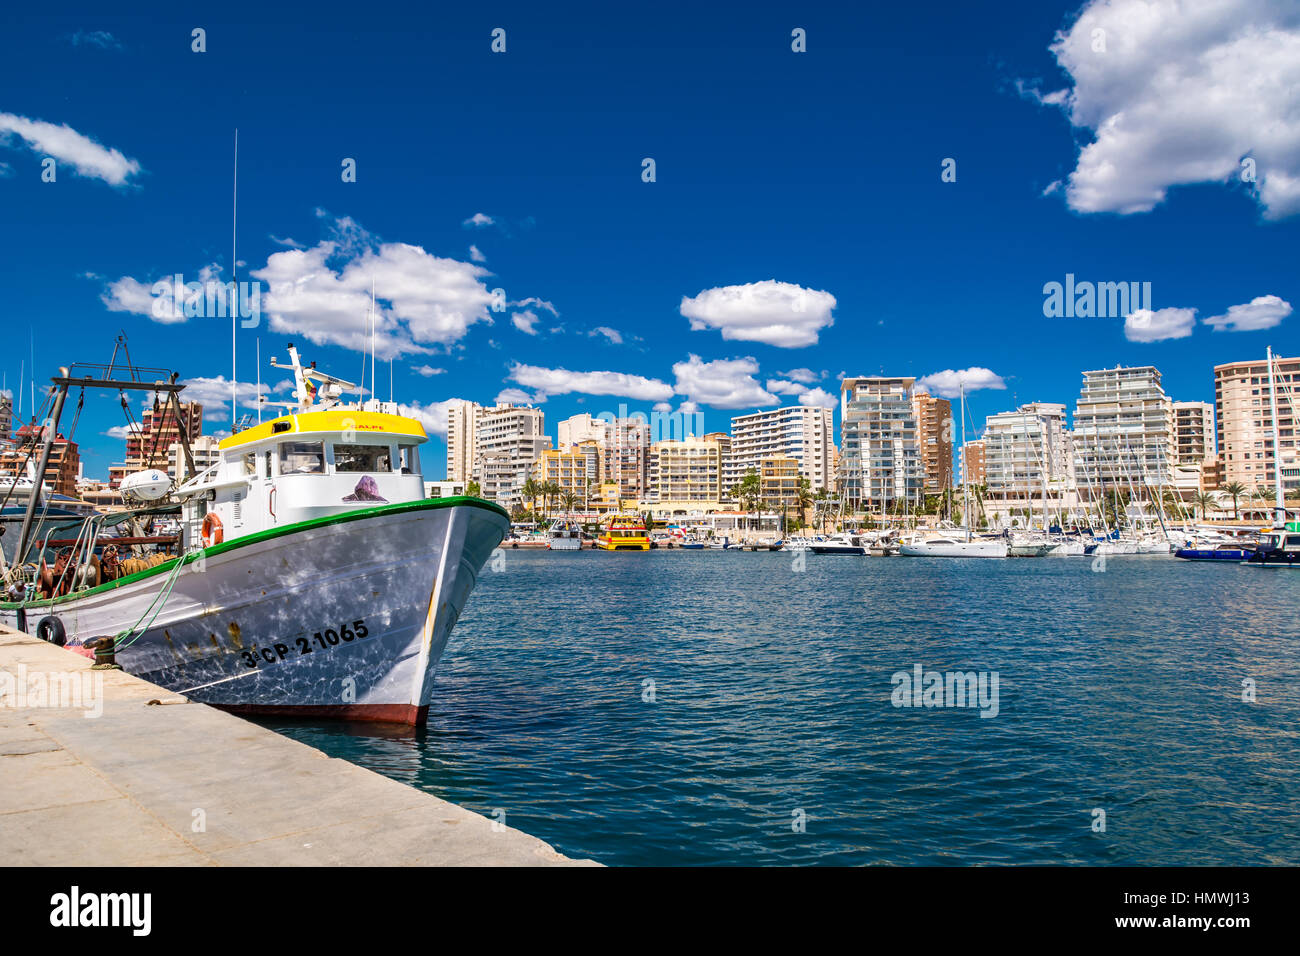 Calpe is a coastal town located in the comarca of Marina Alta, in the province of Alicante, Valencian Community, Spain, by the Mediterranean Sea. Stock Photo